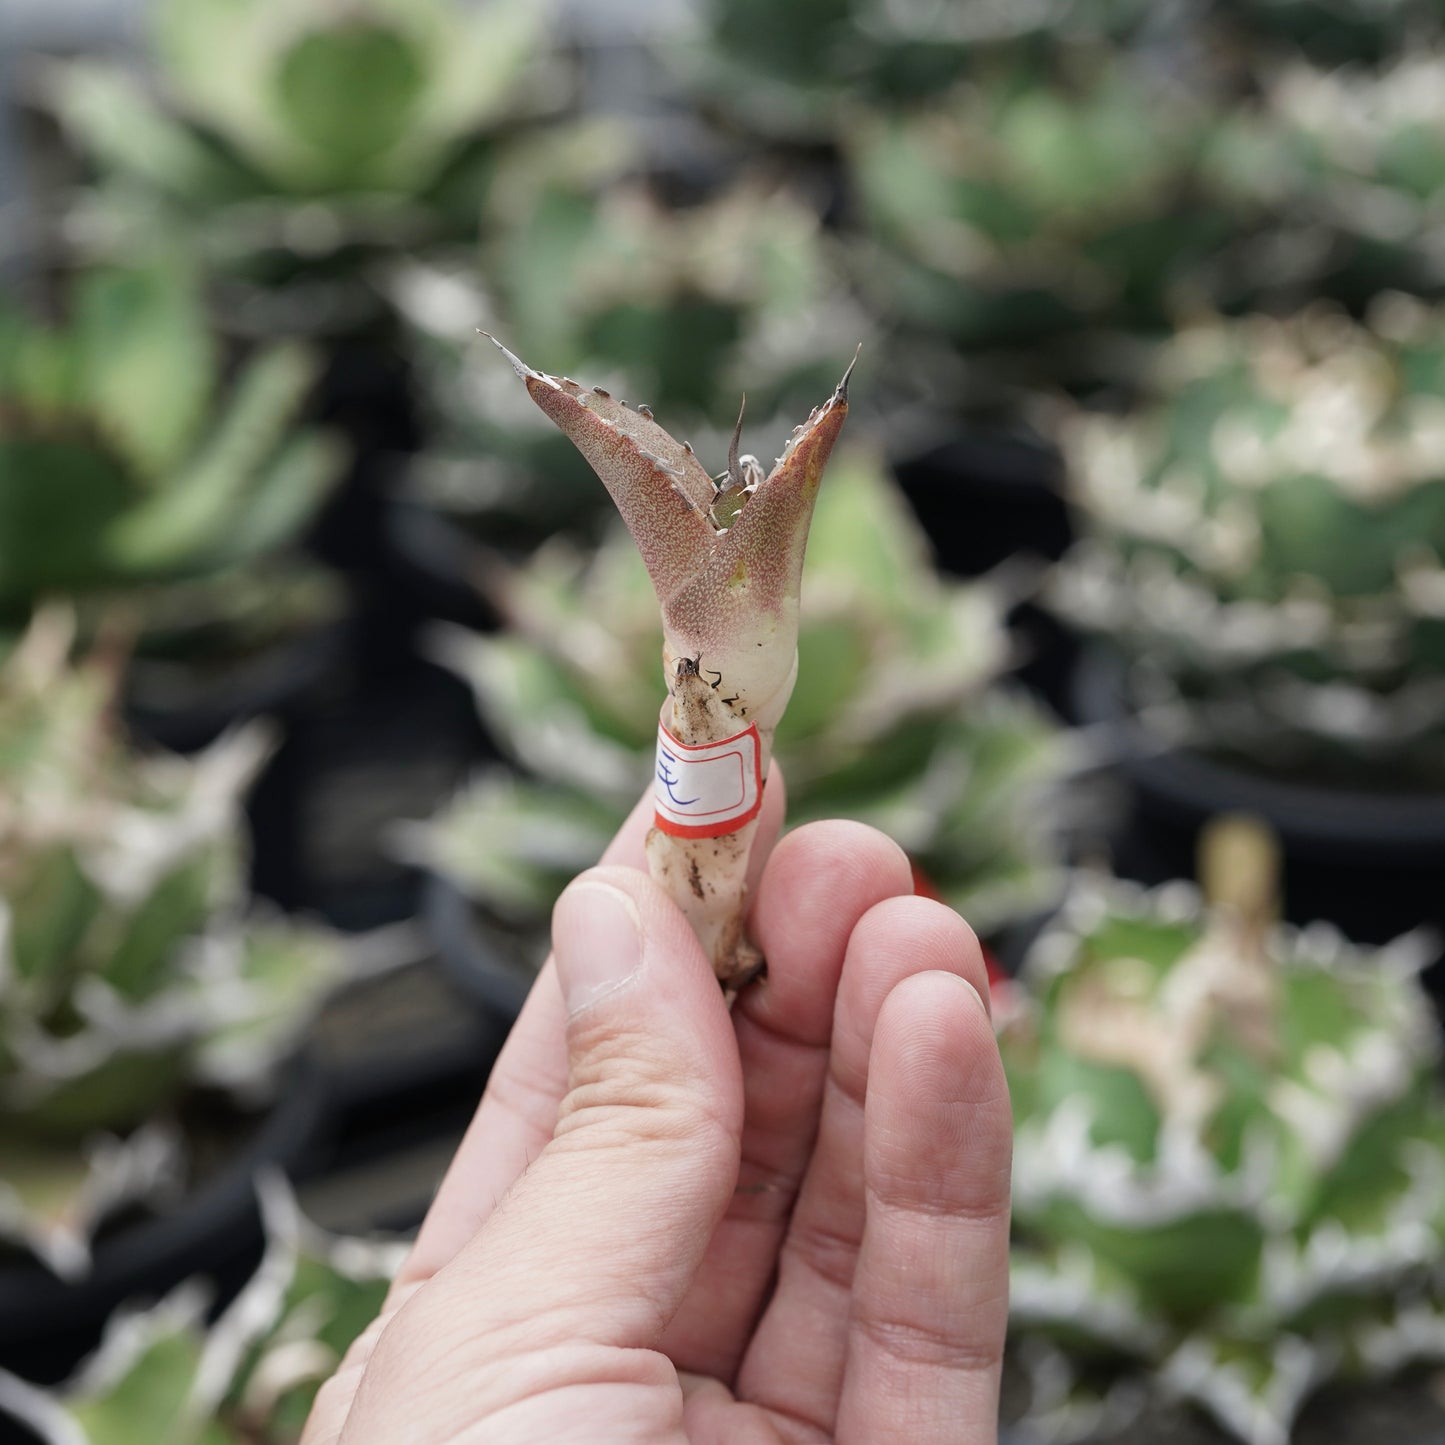 【From lize gardening】Agave titanota ‘Feather(羽毛)’ Baby